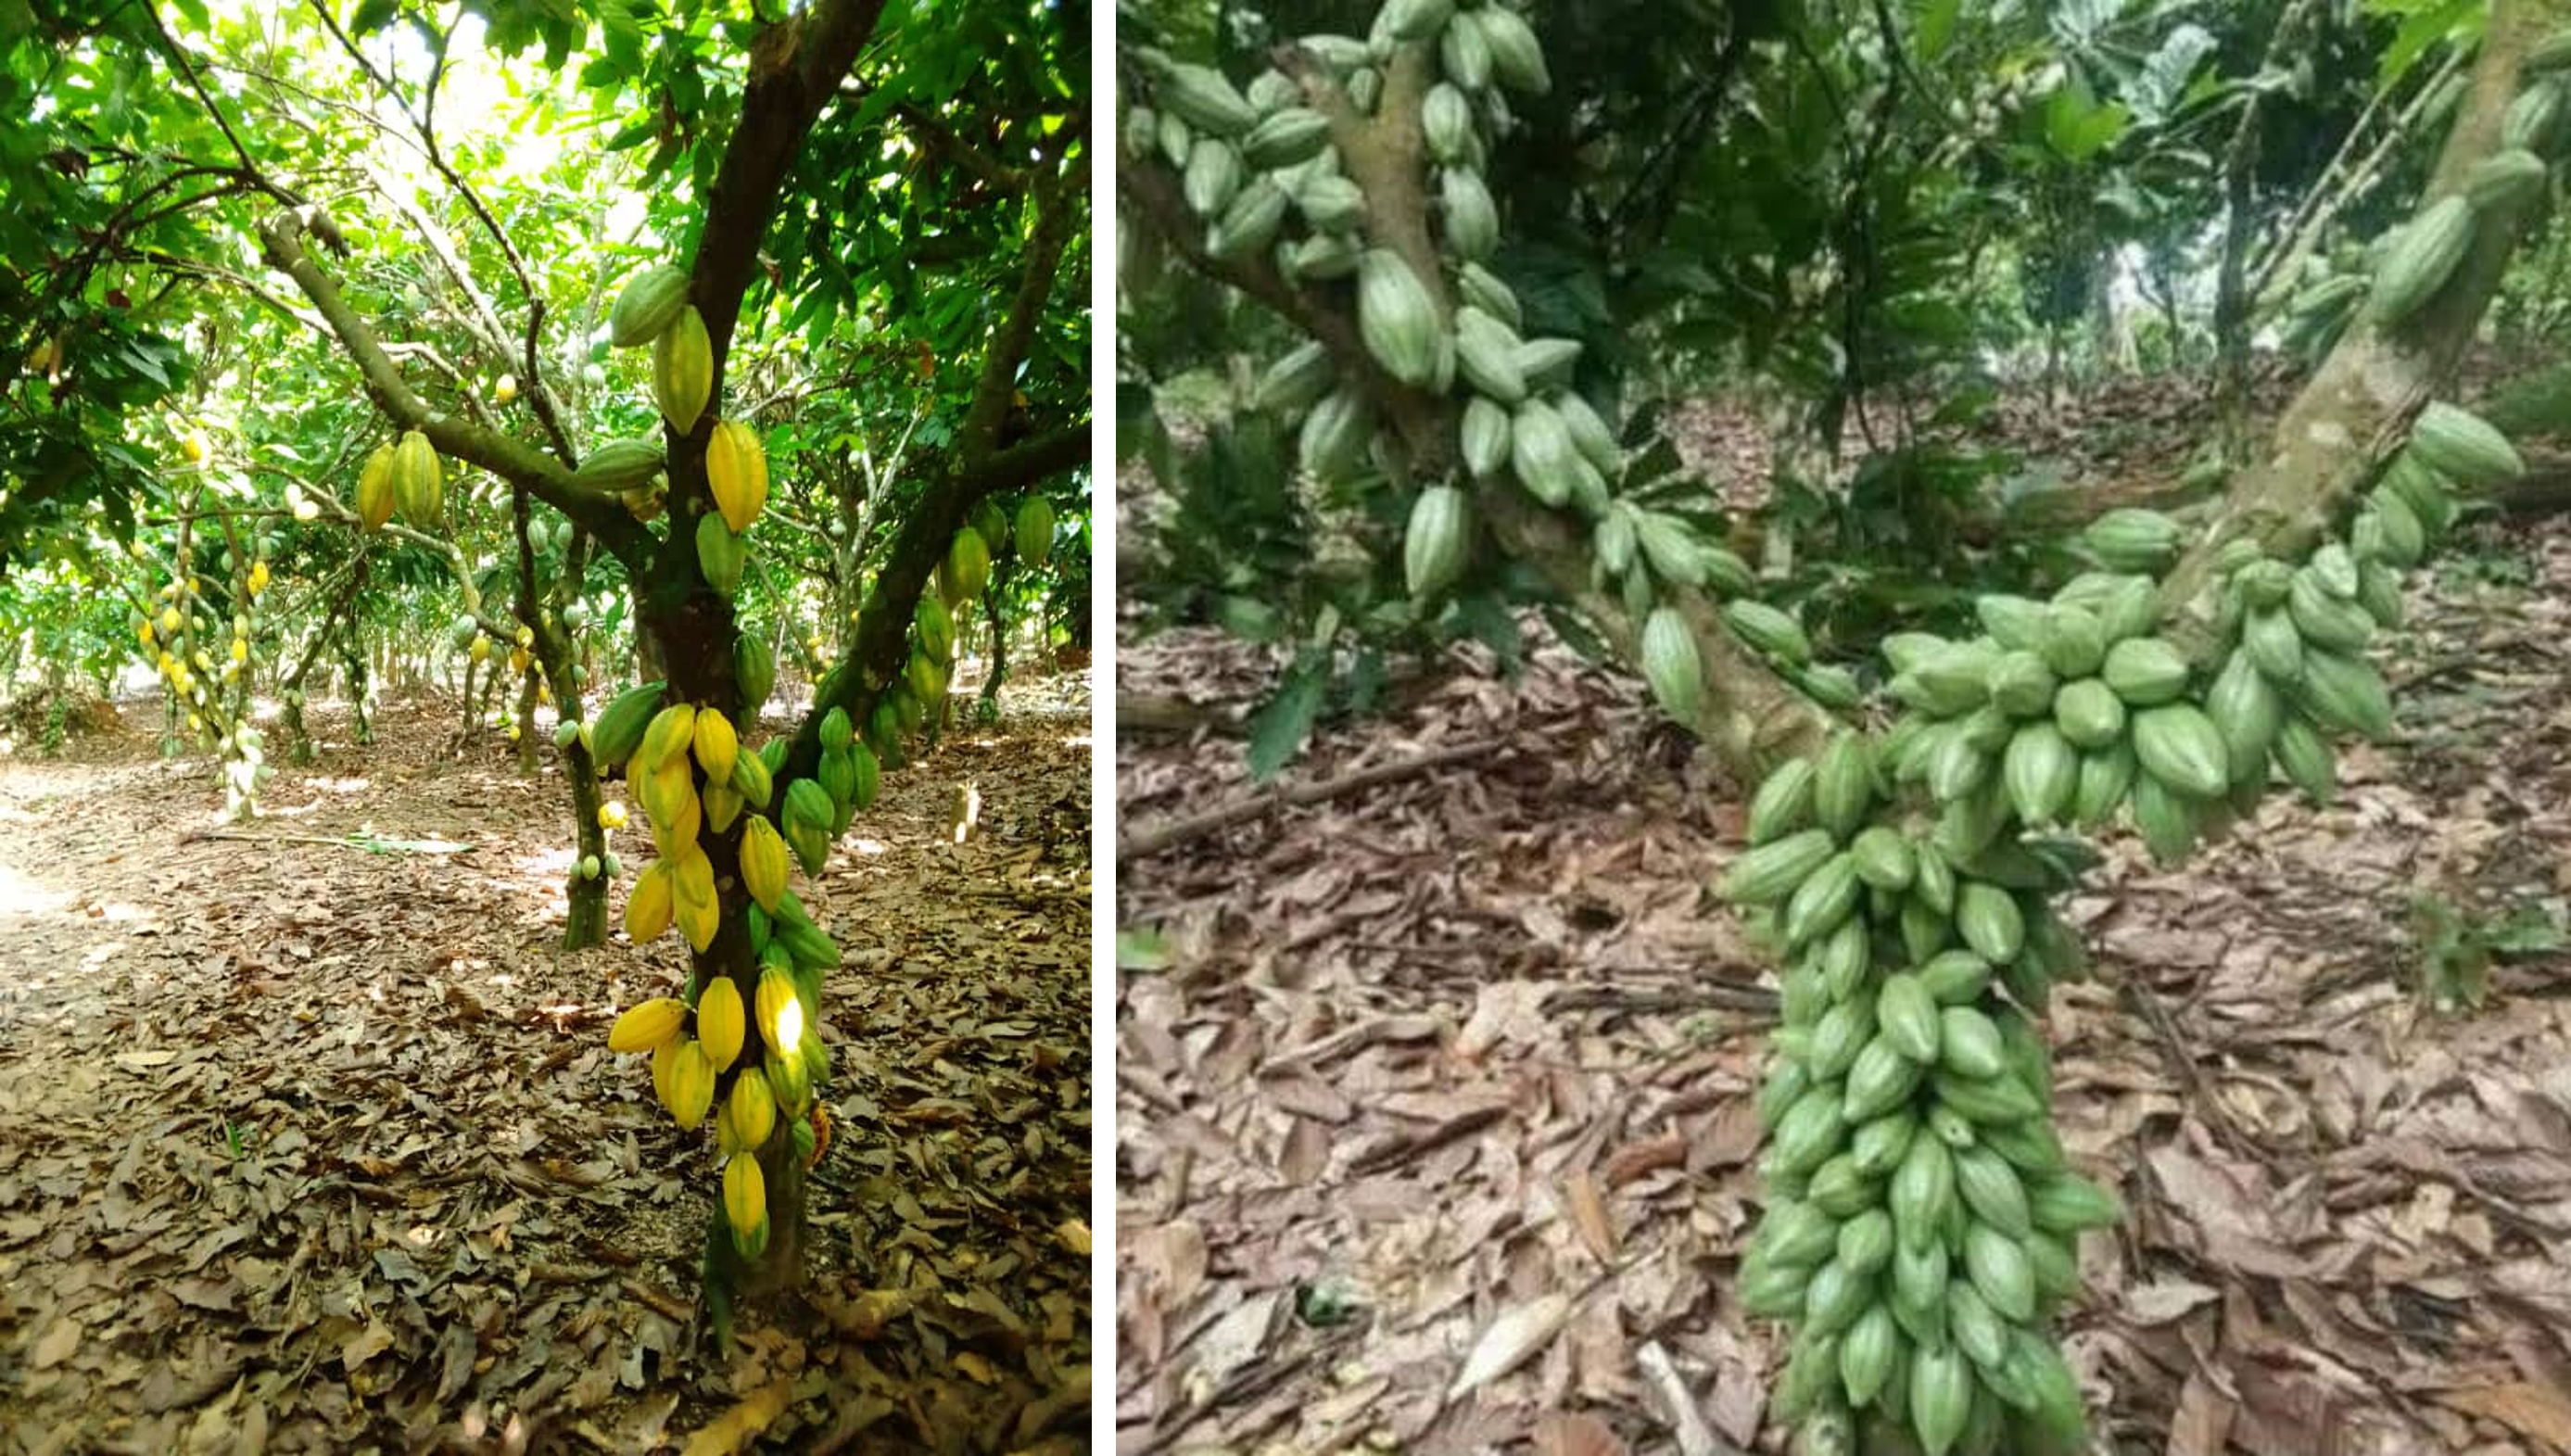 Cacao production: Challenges and Management Strategies